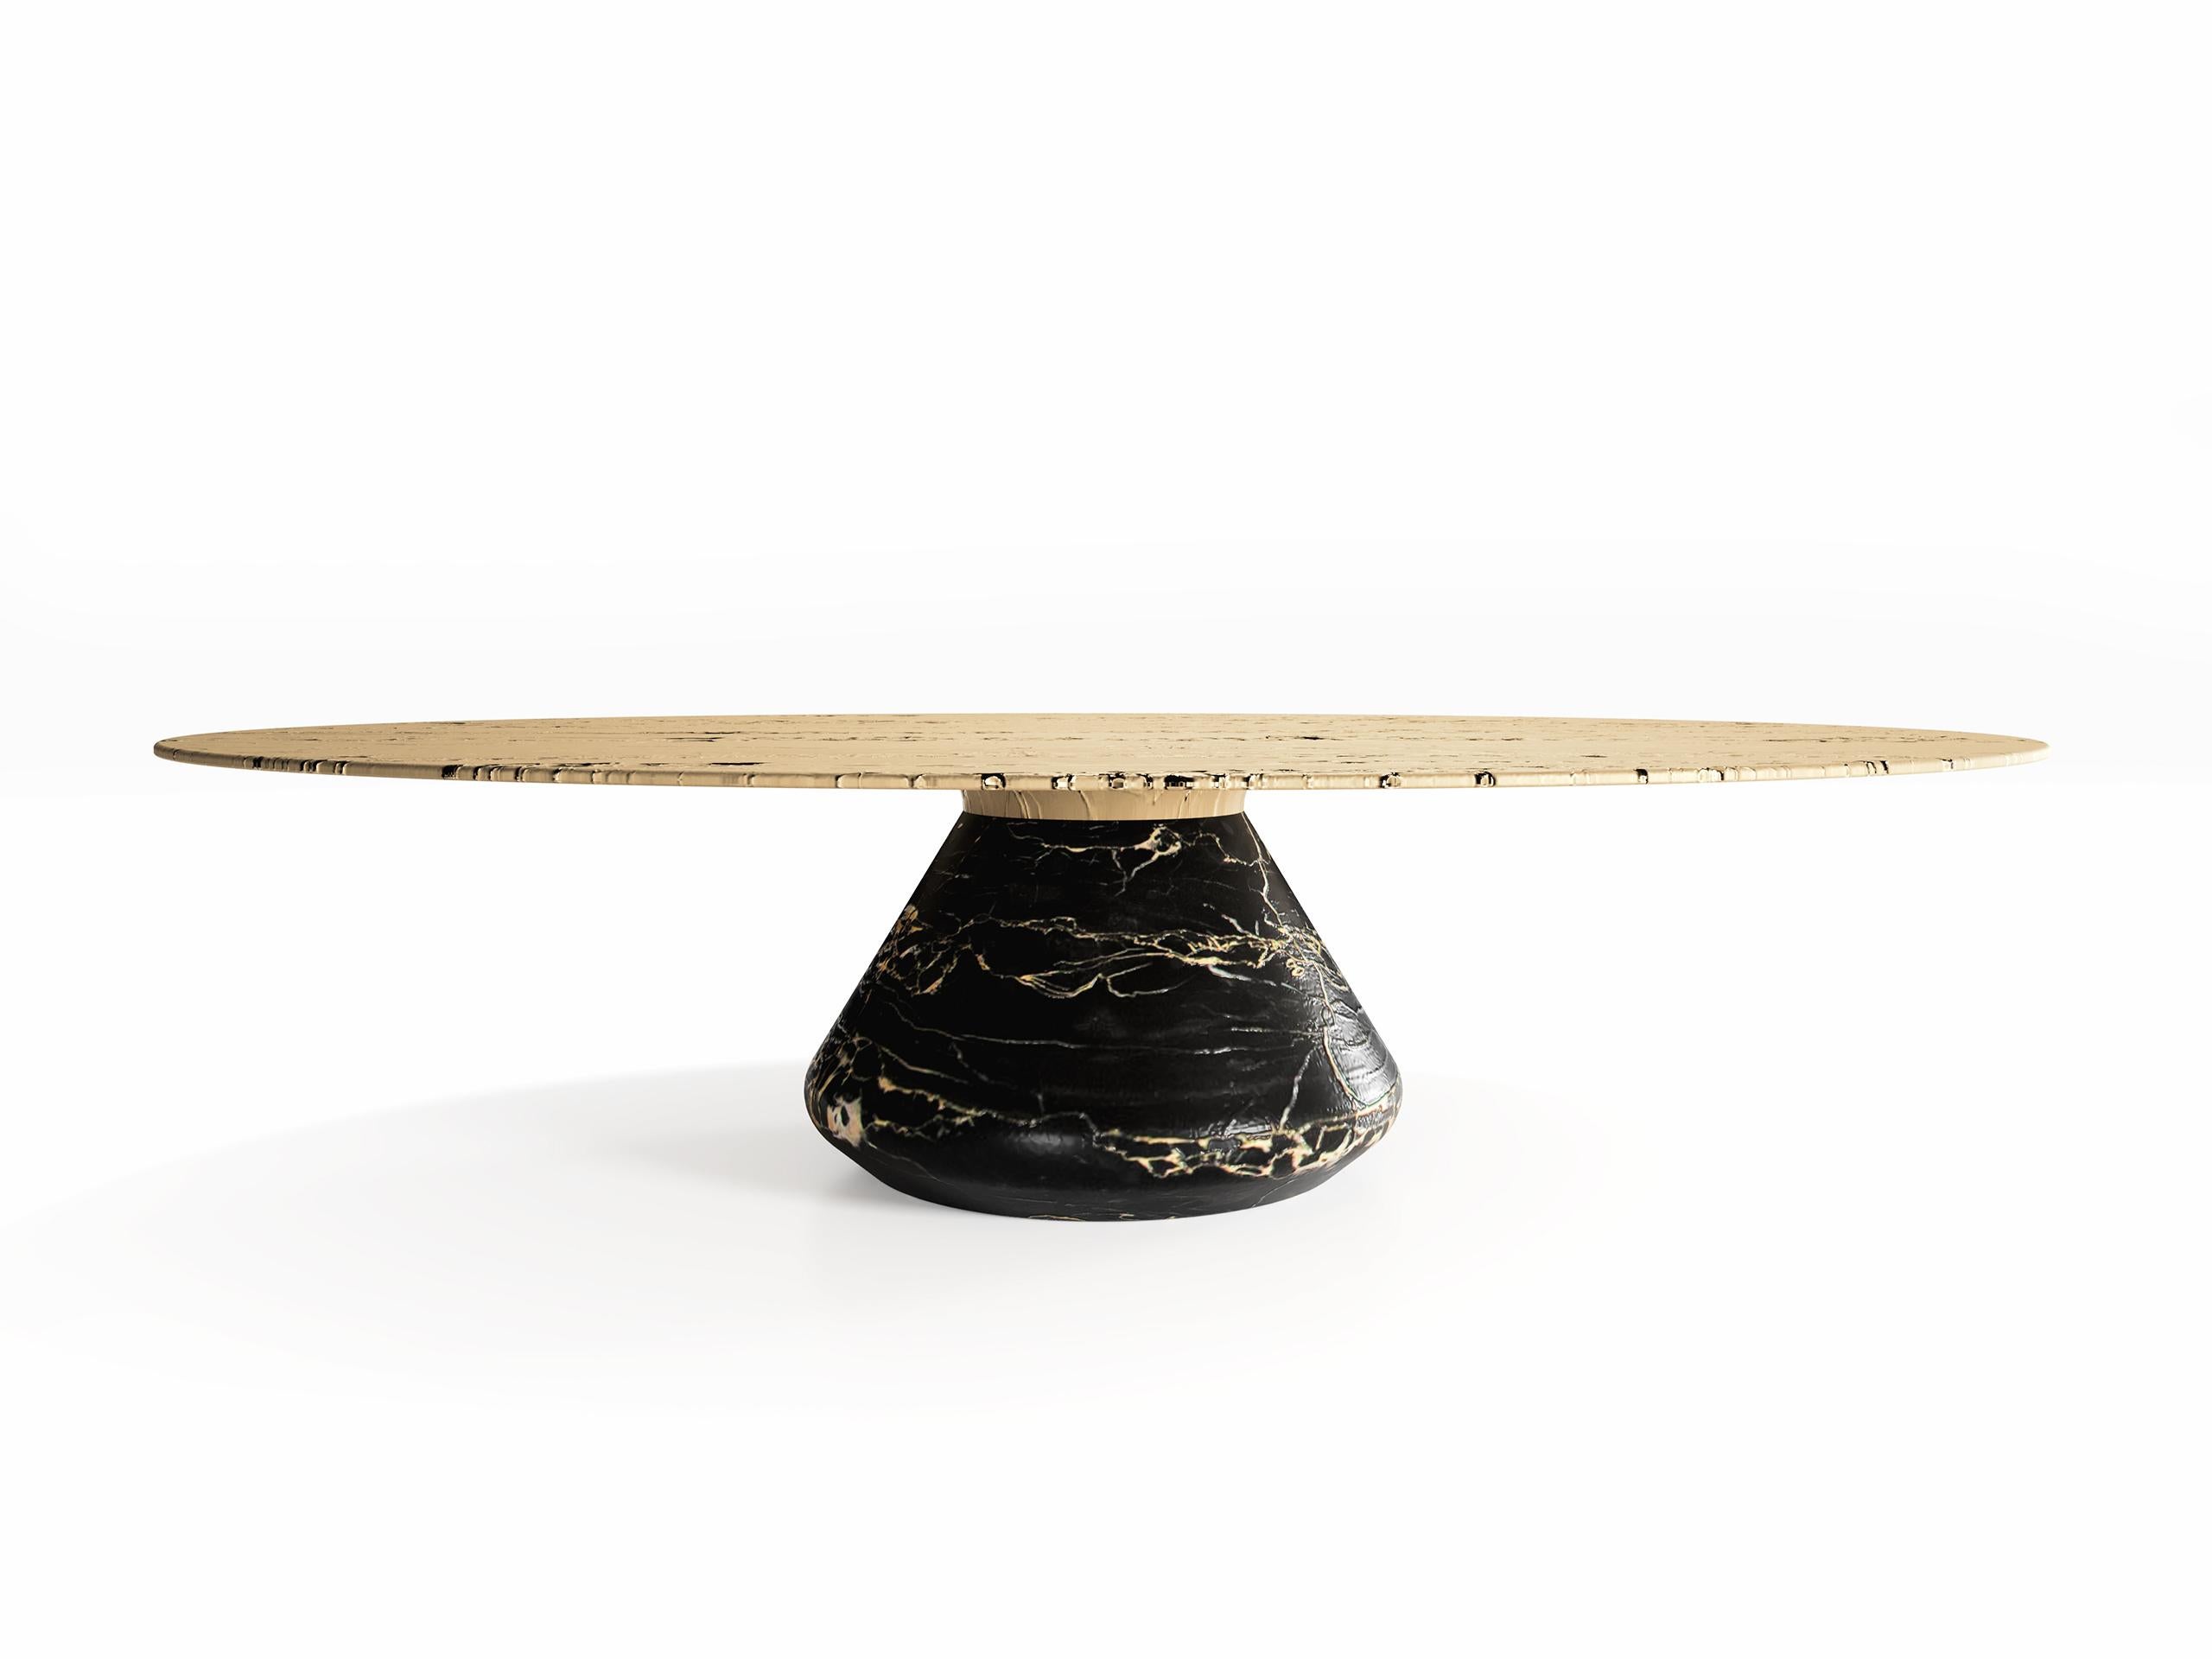 The Grace Eclipse I coffee table, 1 of 1 by Grzegorz Majka
Edition 1 of 1
Dimensions: 54 x 48 x 14 in
Materials: Nero Portoro marble base. Solid casted brass top. 


“Grace Eclipse” is the touch of stone. Going beyond stereotypical solutions